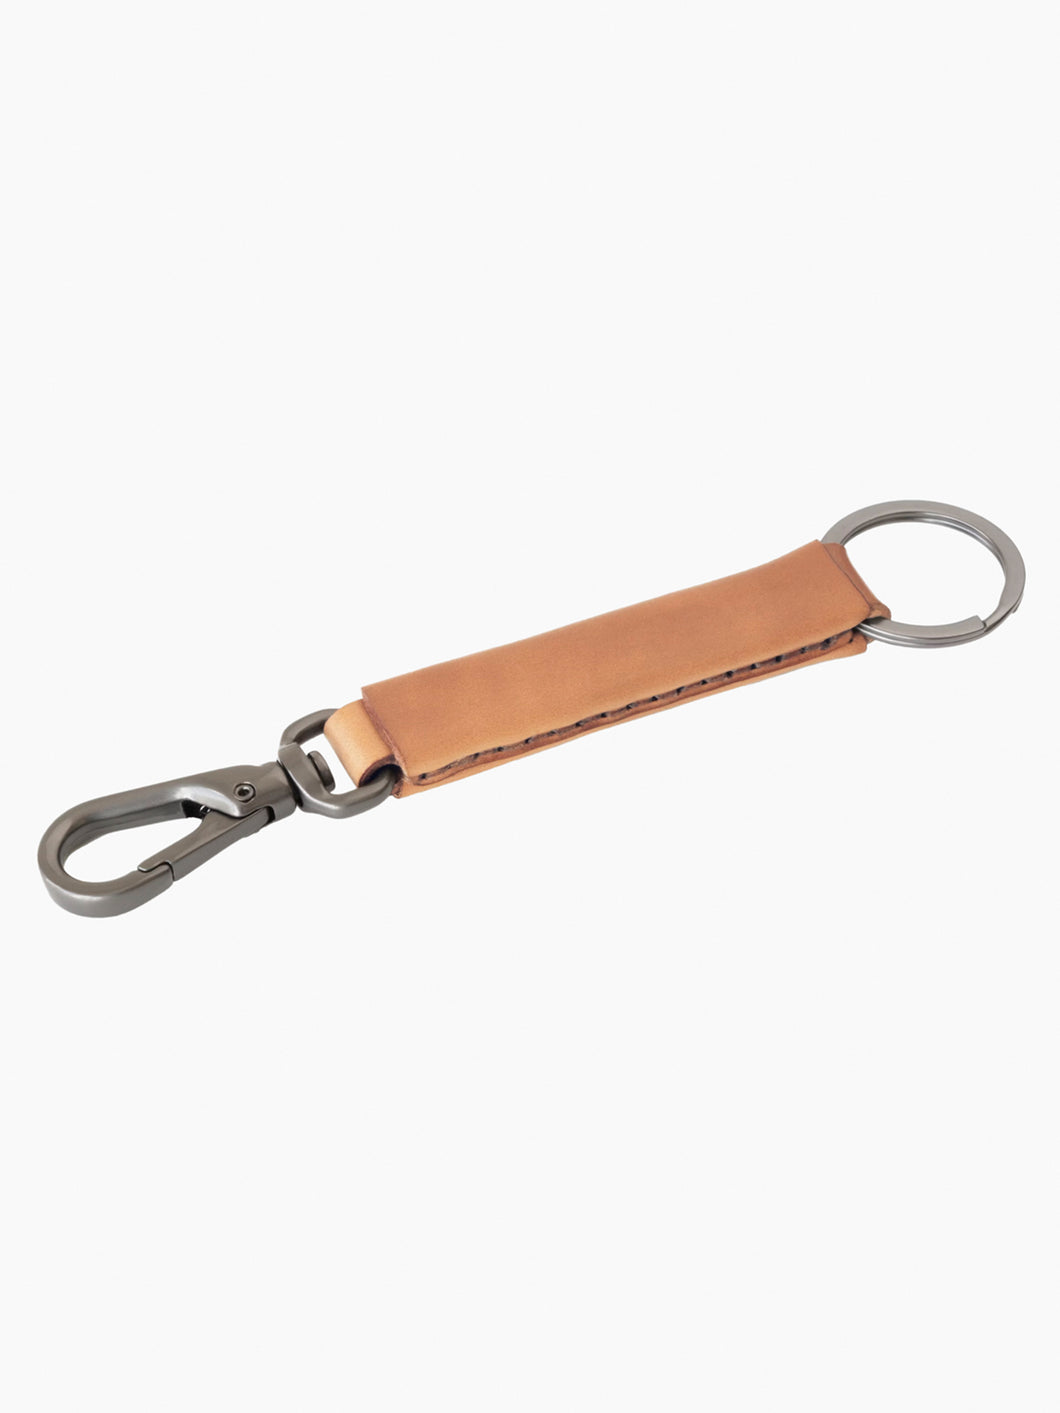 Loop Keychain with Snap Hook - Natural Shell Cordovan